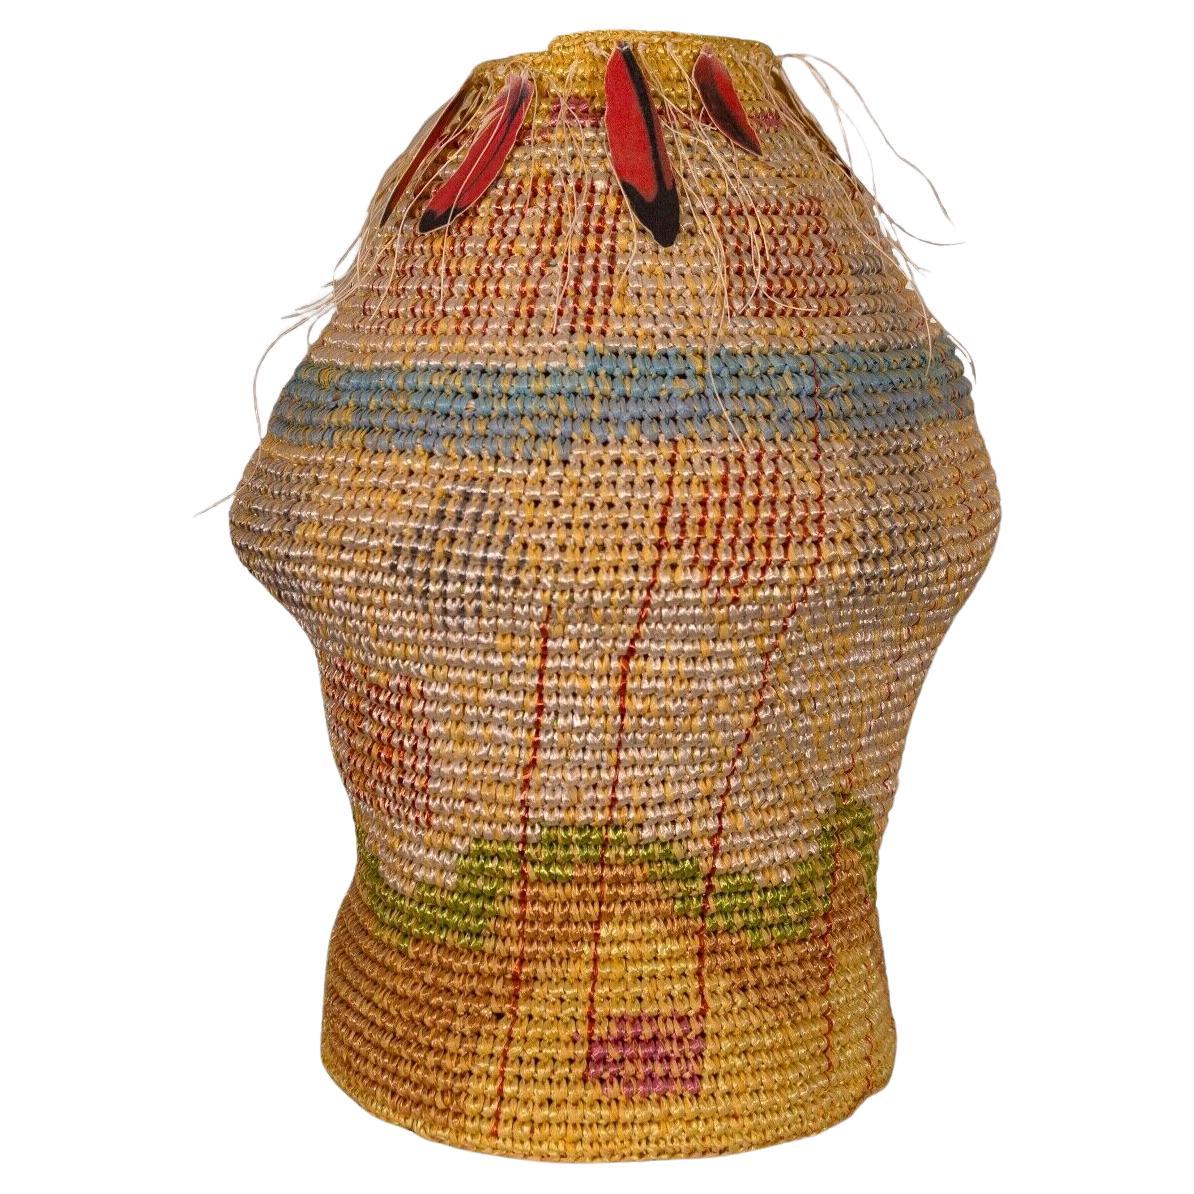 Katherine Westphal Big Sky Signed Raffia Woven Basket w/ Feather Accents 1994 For Sale